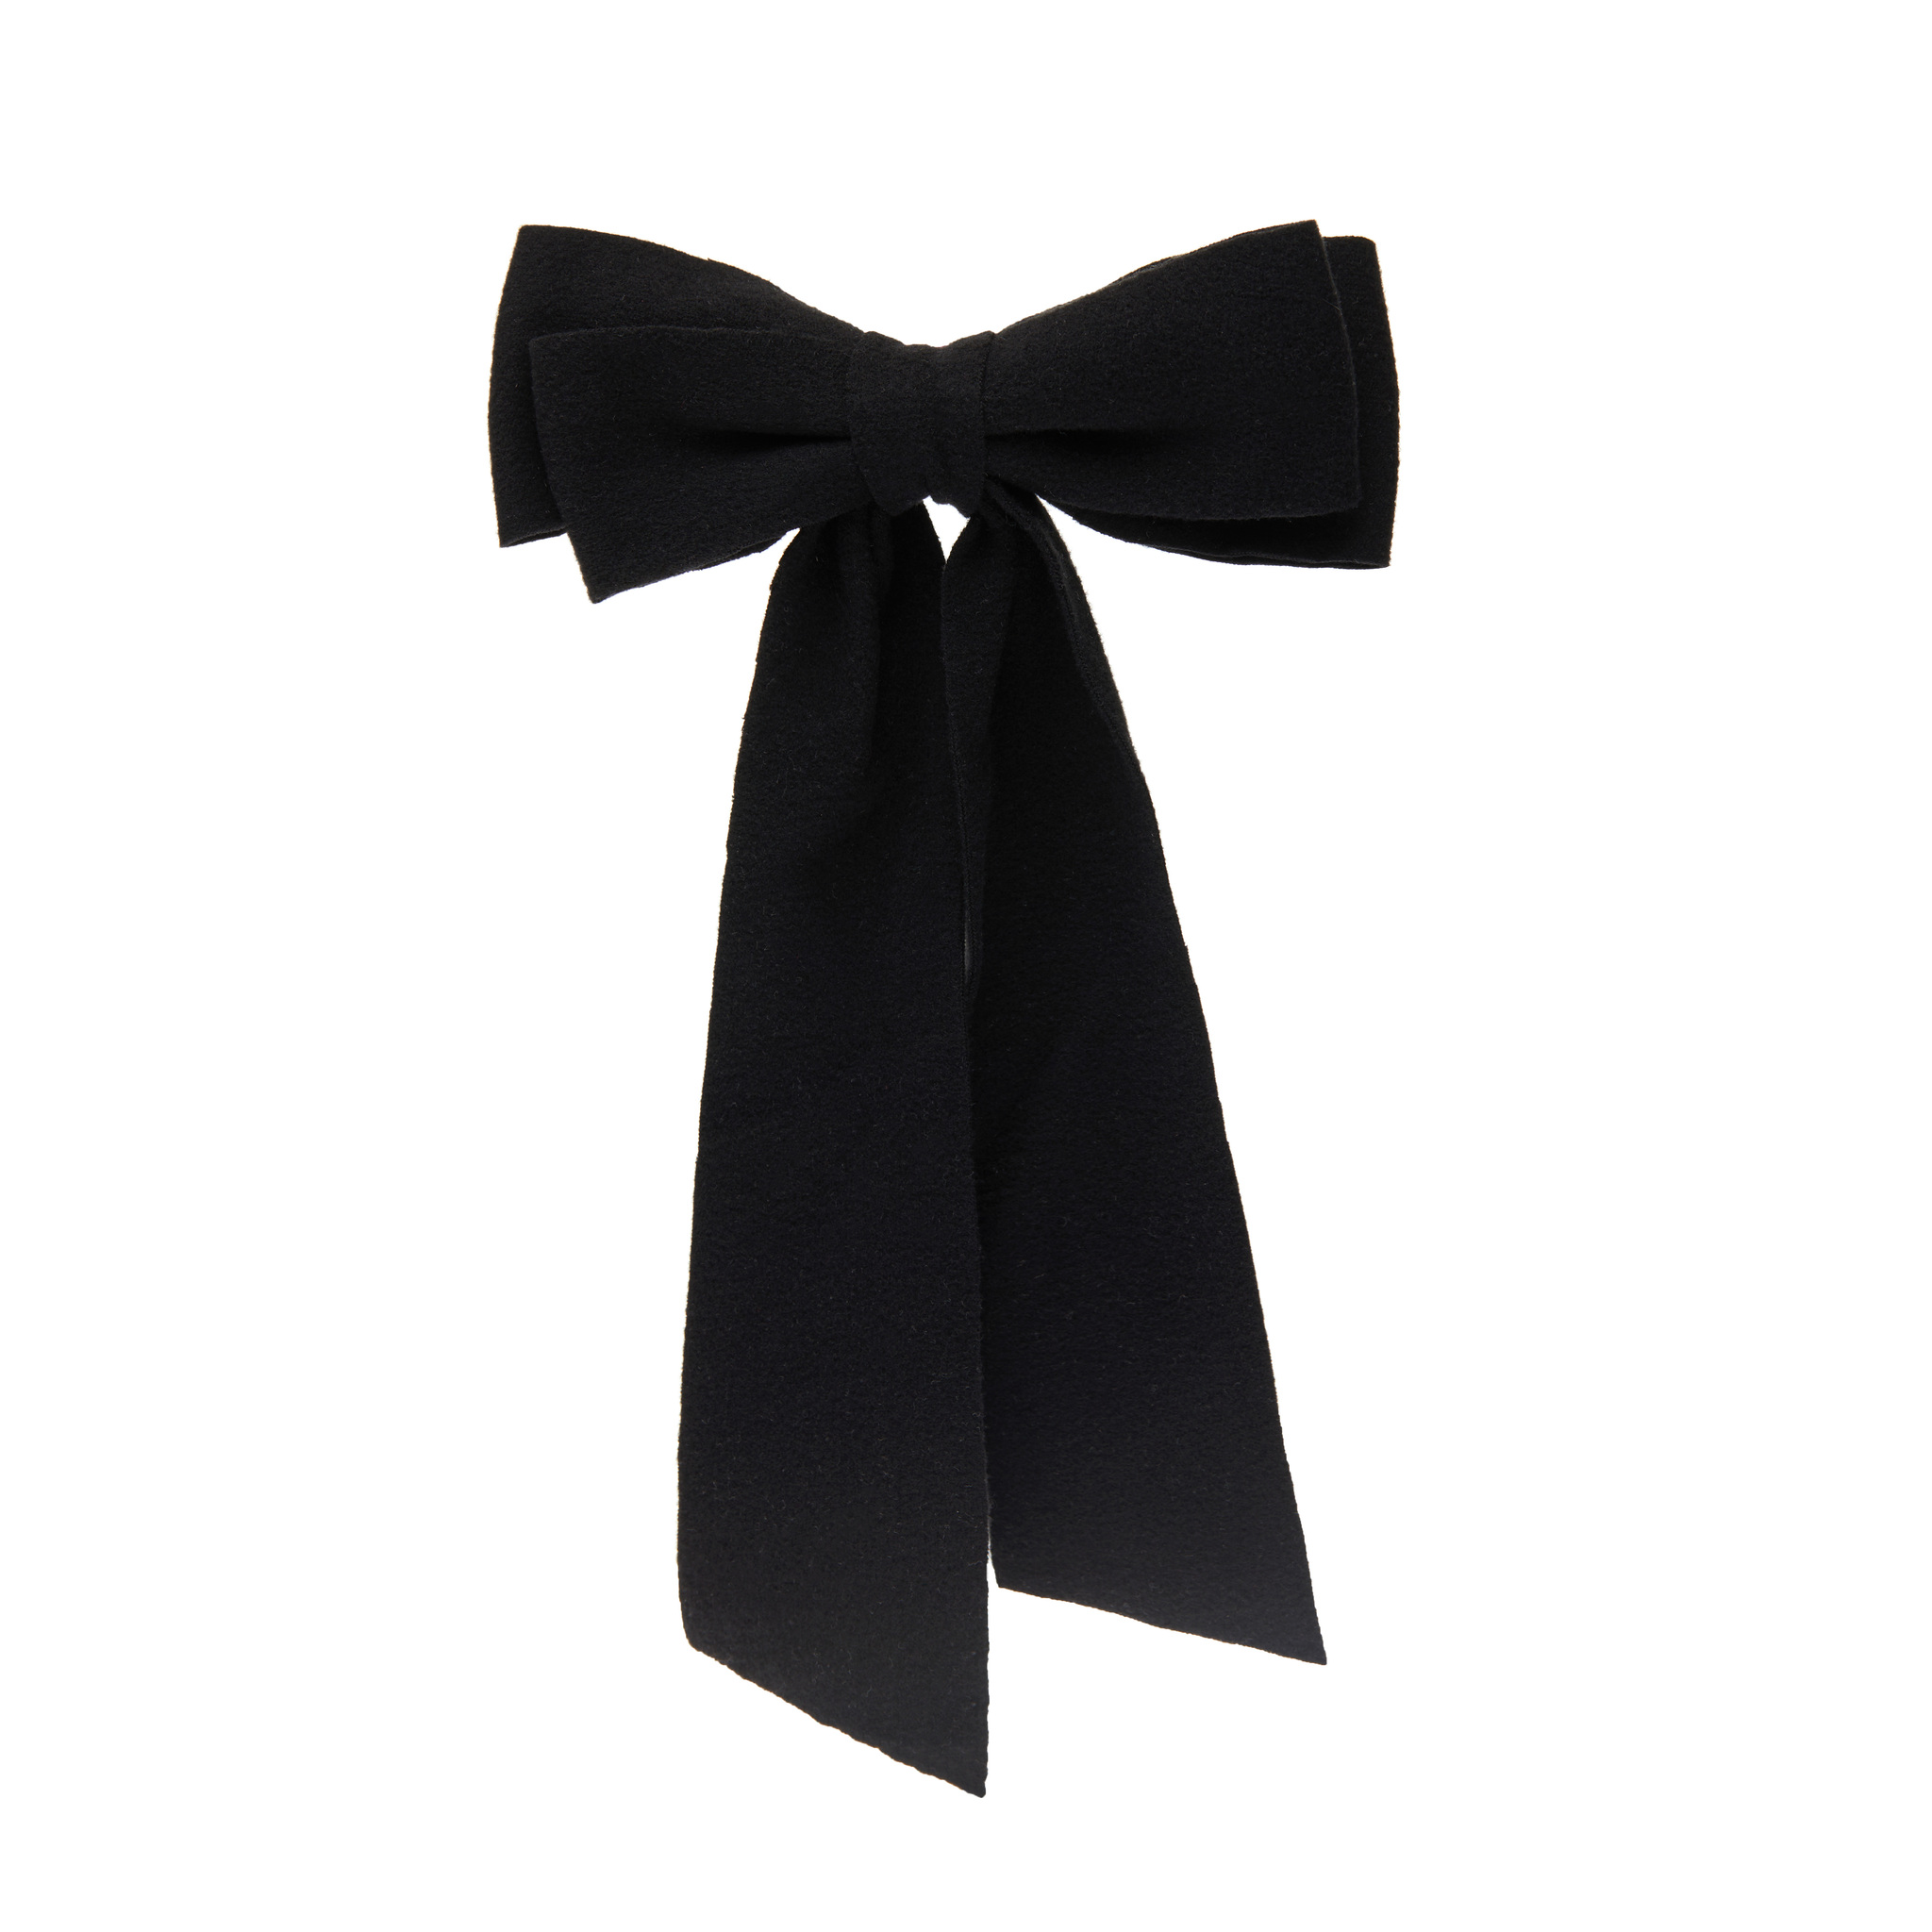 HOLLY JUNE Заколка Ribbon Bow Hair Clip – Black holly june заколка bow hair clip – red